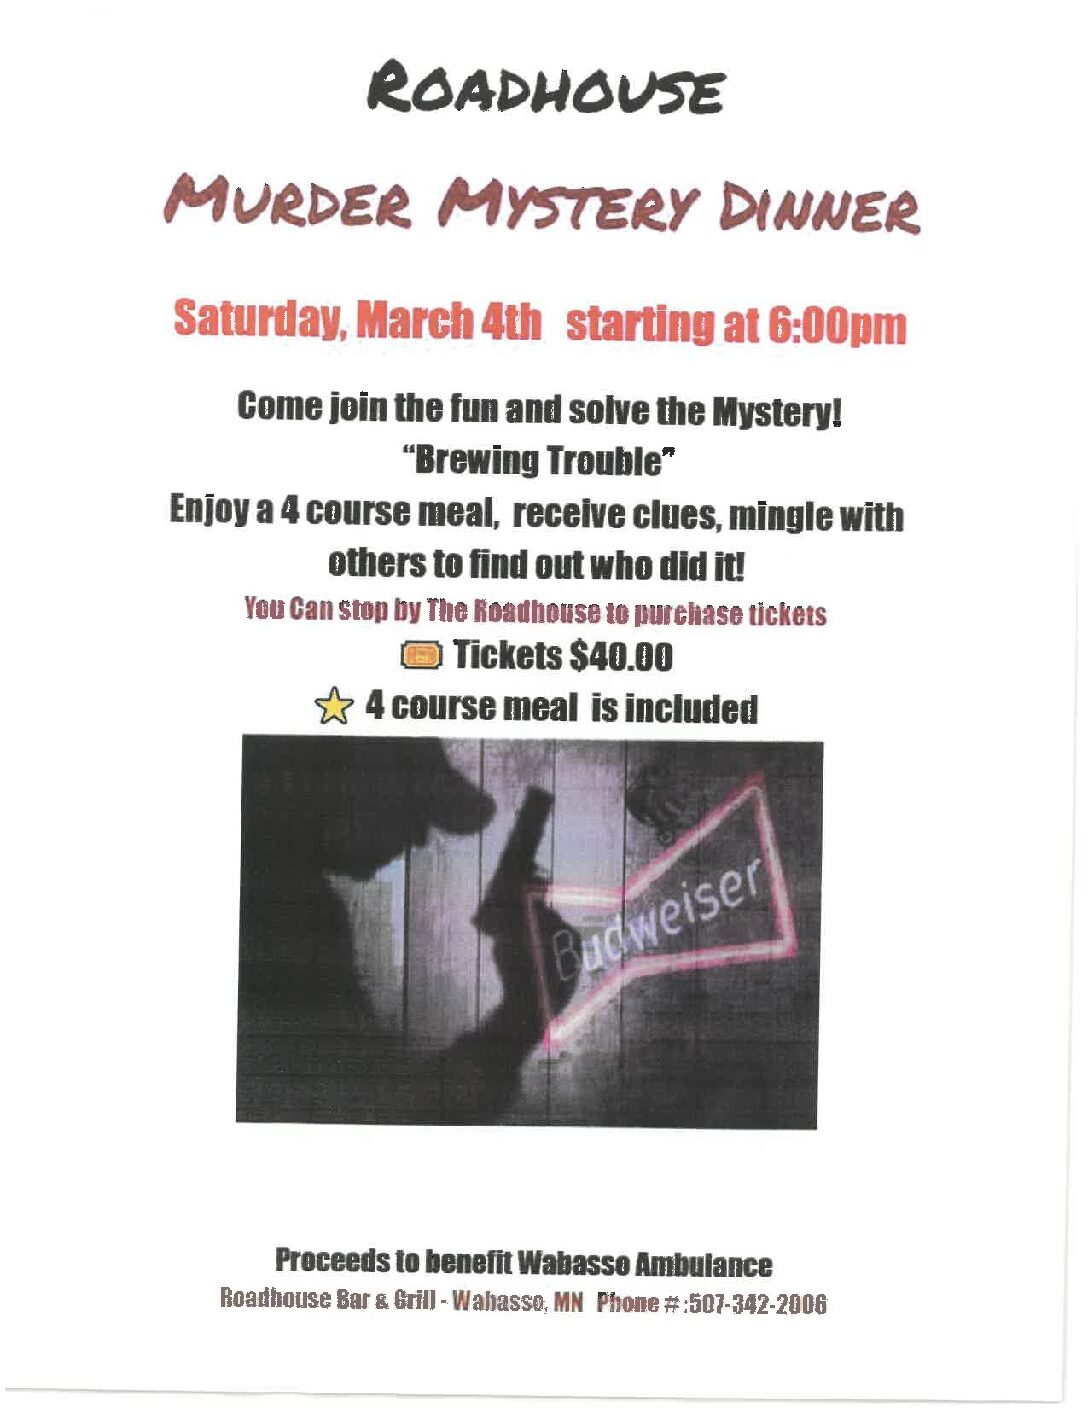 <h1 class="tribe-events-single-event-title">Murder Mystery Dinner</h1>